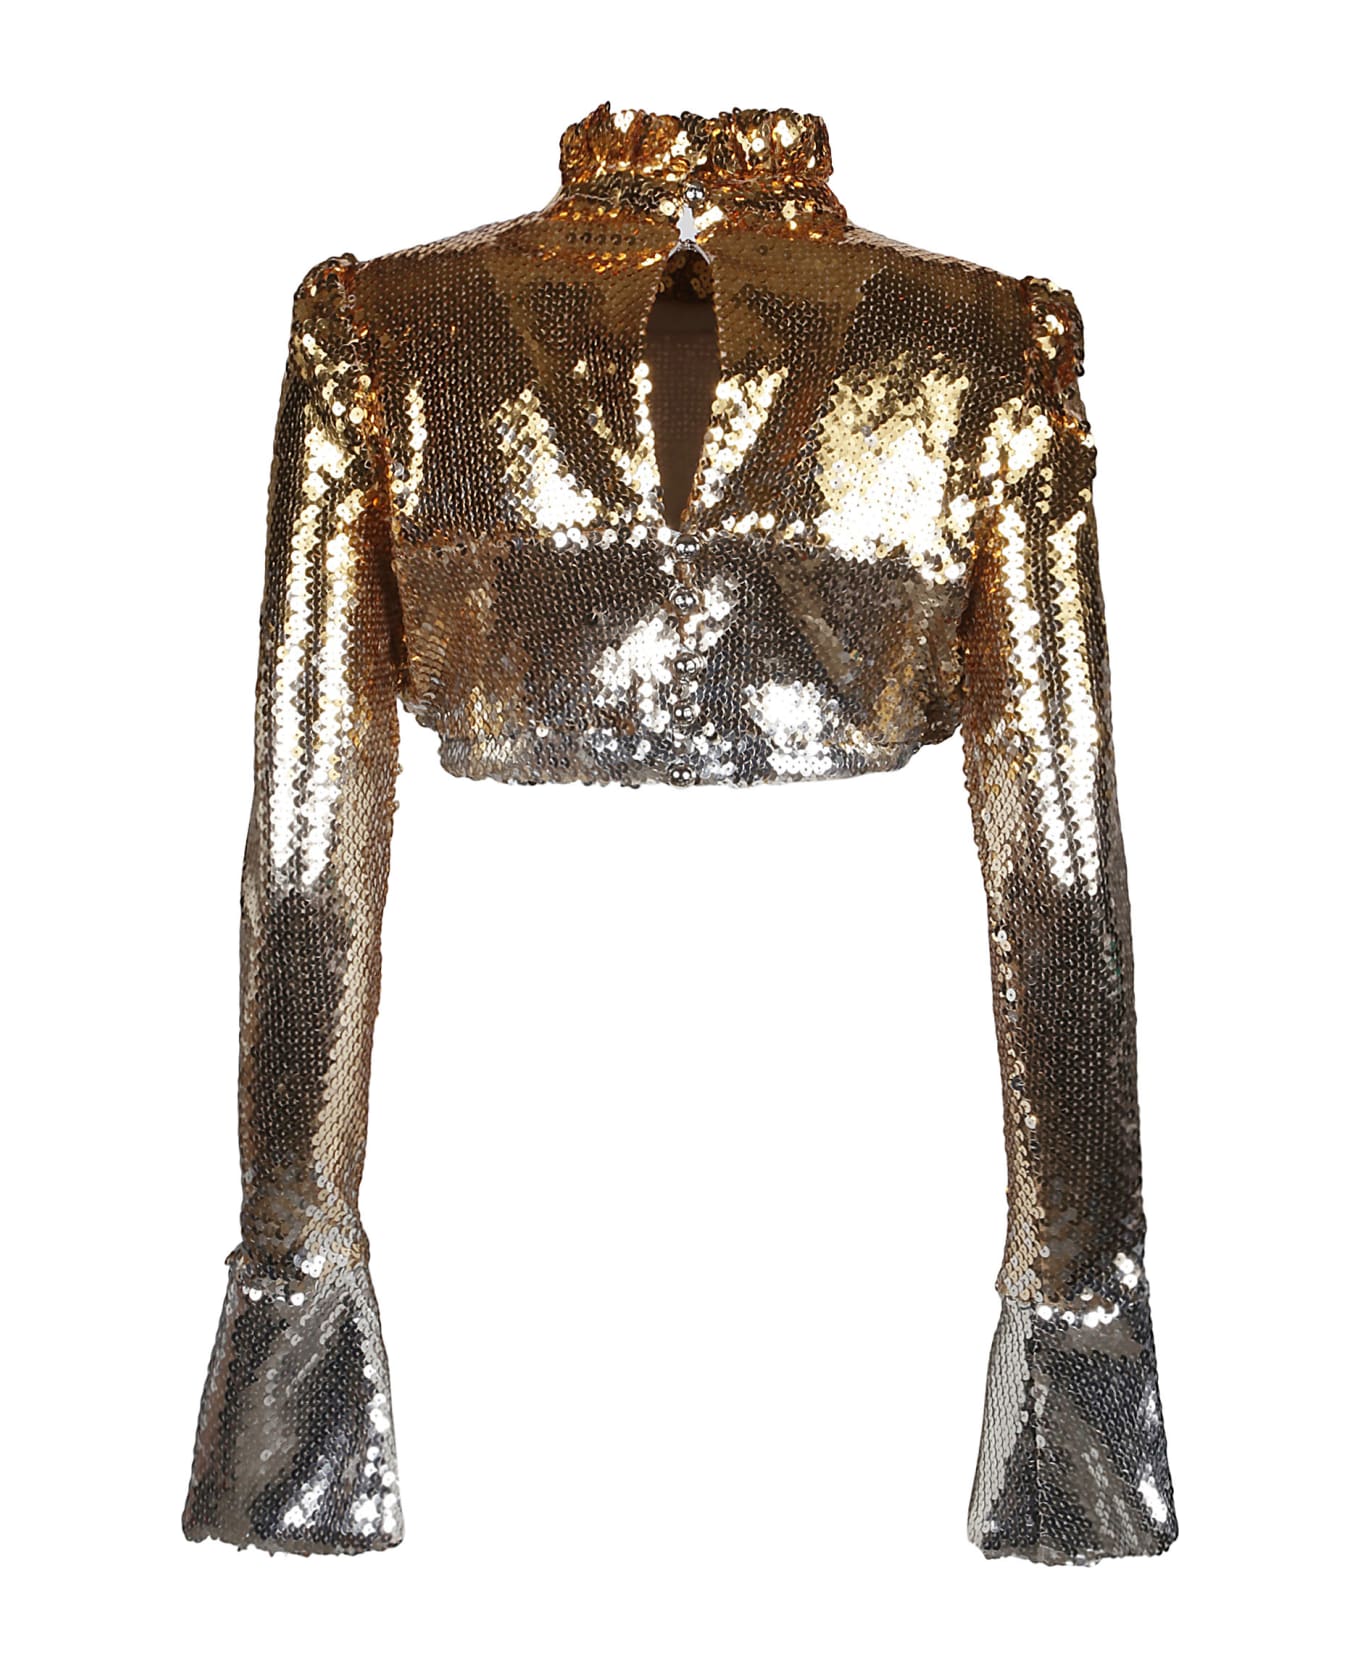 Paco Rabanne Long Sleeve Cropped Top - Gold/silver トップス